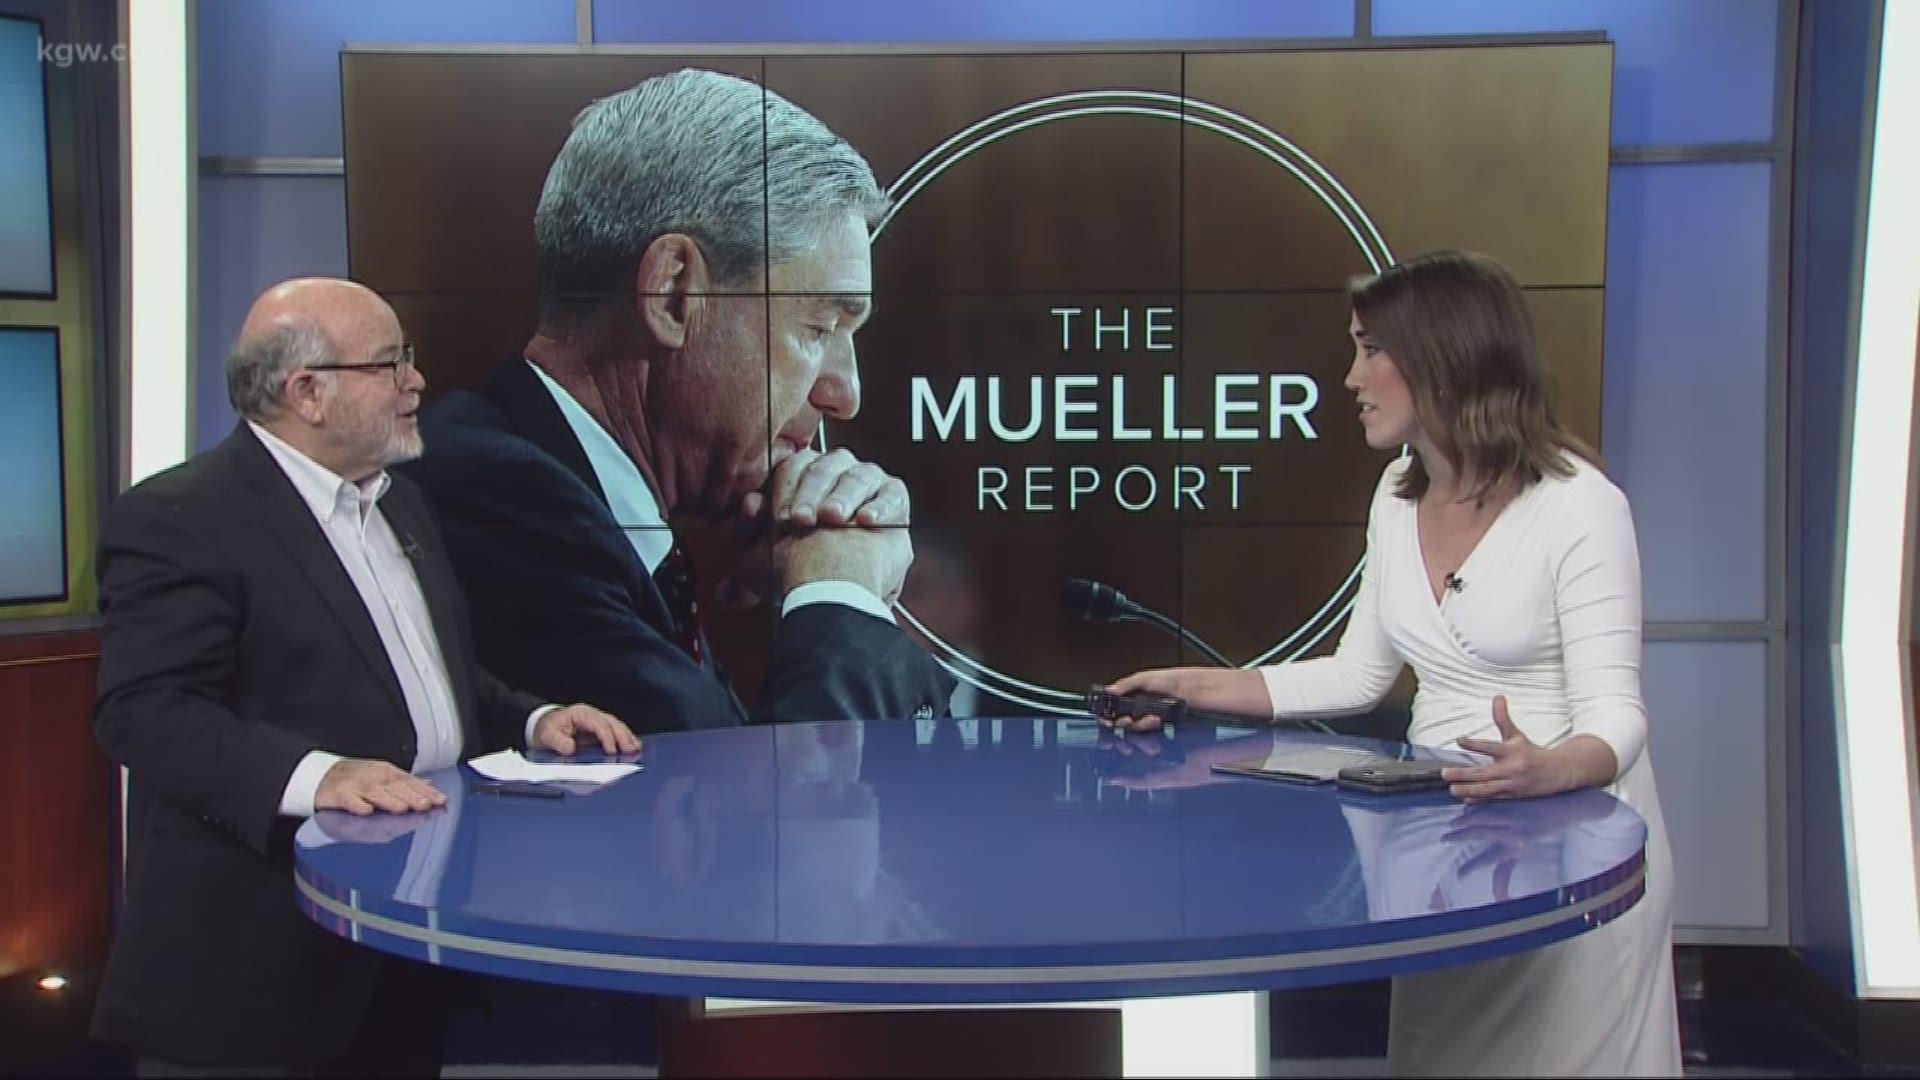 KGW political analyst Len Bergstein talks about the political effects of the Mueller report